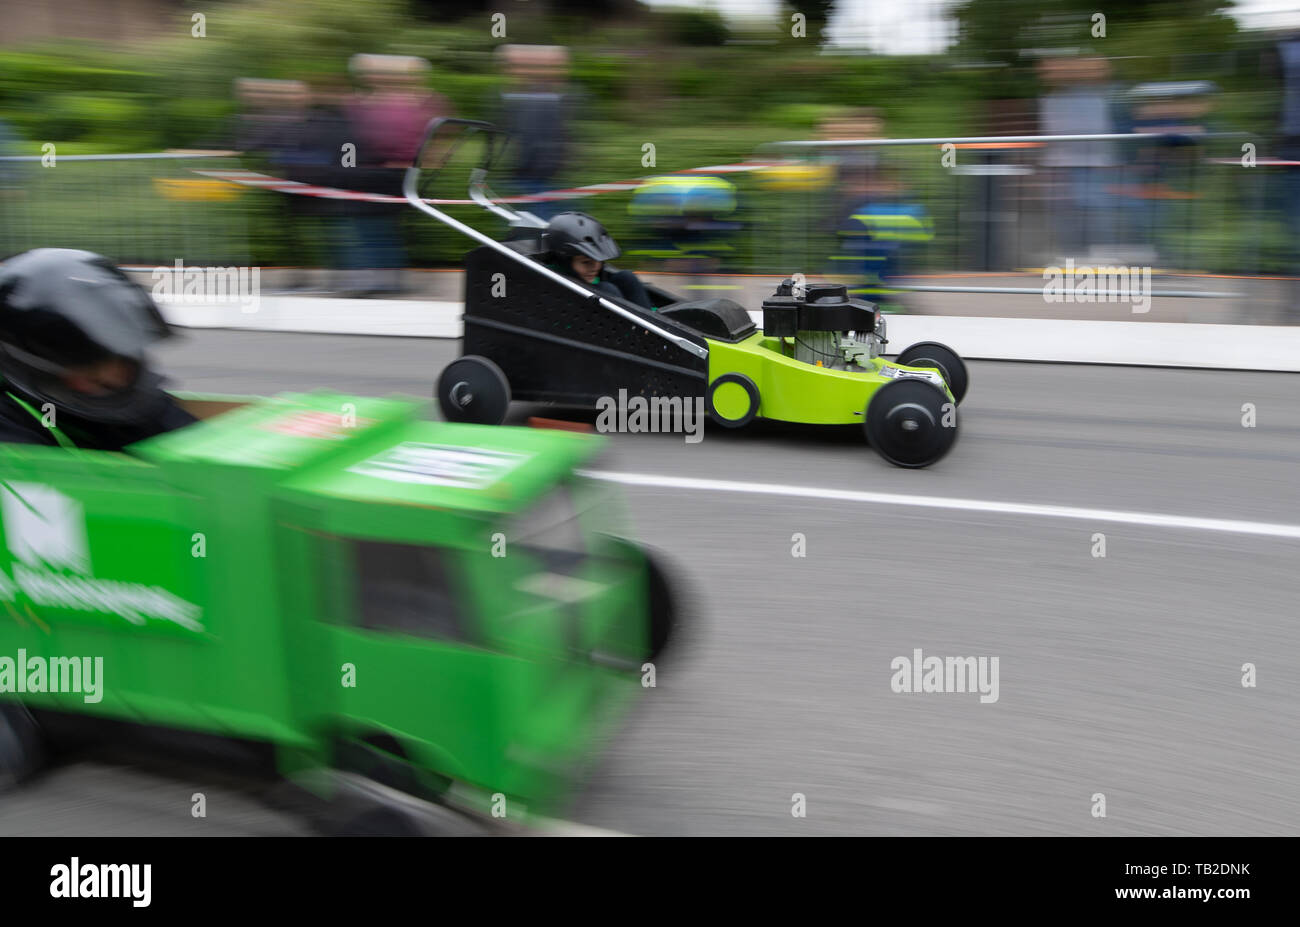 Osnabrück, Lower Saxony, Germany A soapbox in the shape of a lawn mower drives on a road during a soapbox race Xxx Photo